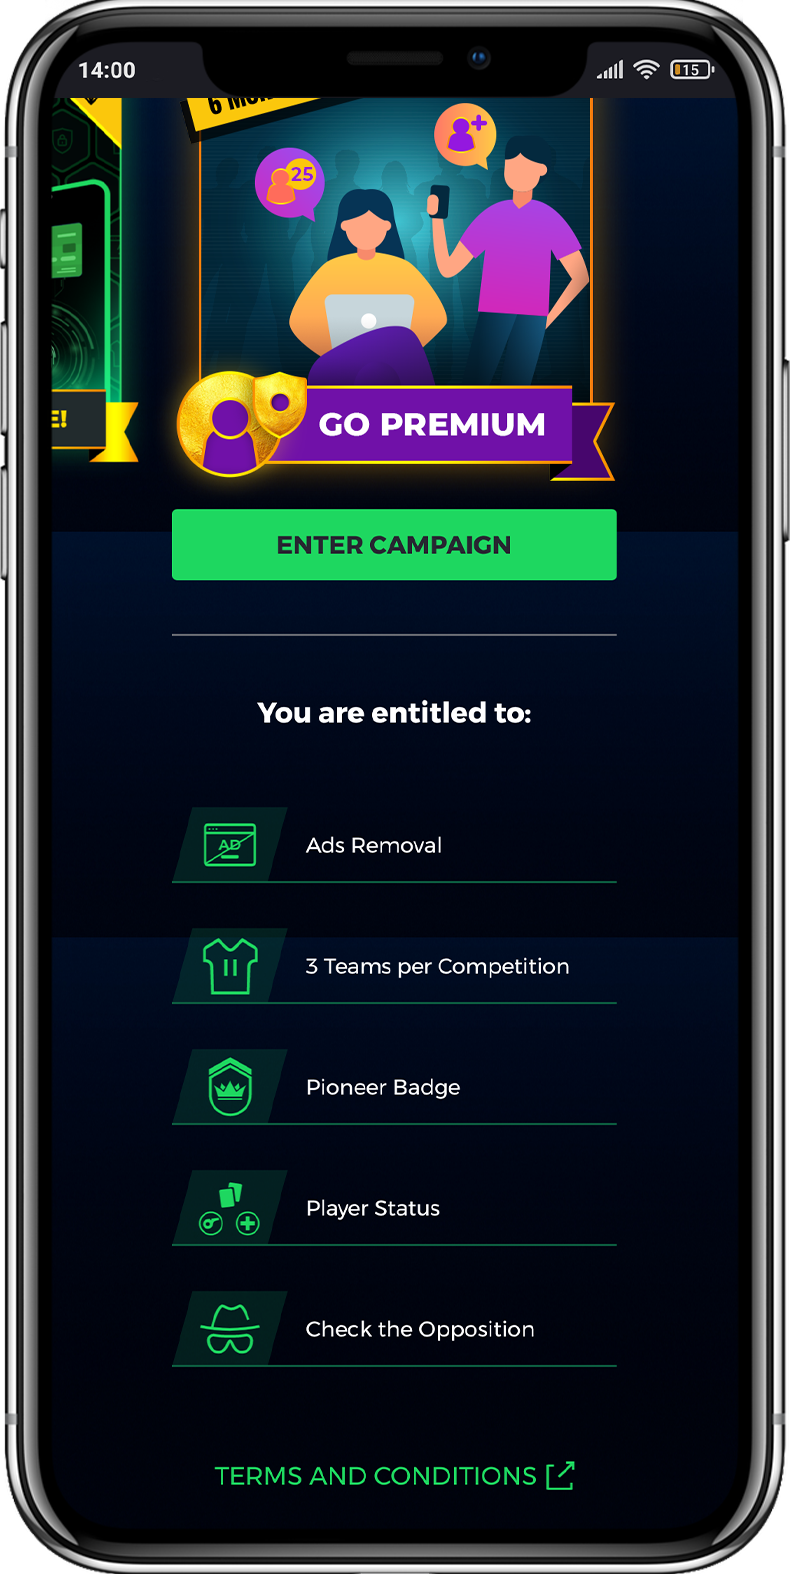 The RealFevr Premium Influencer campaign is now available.